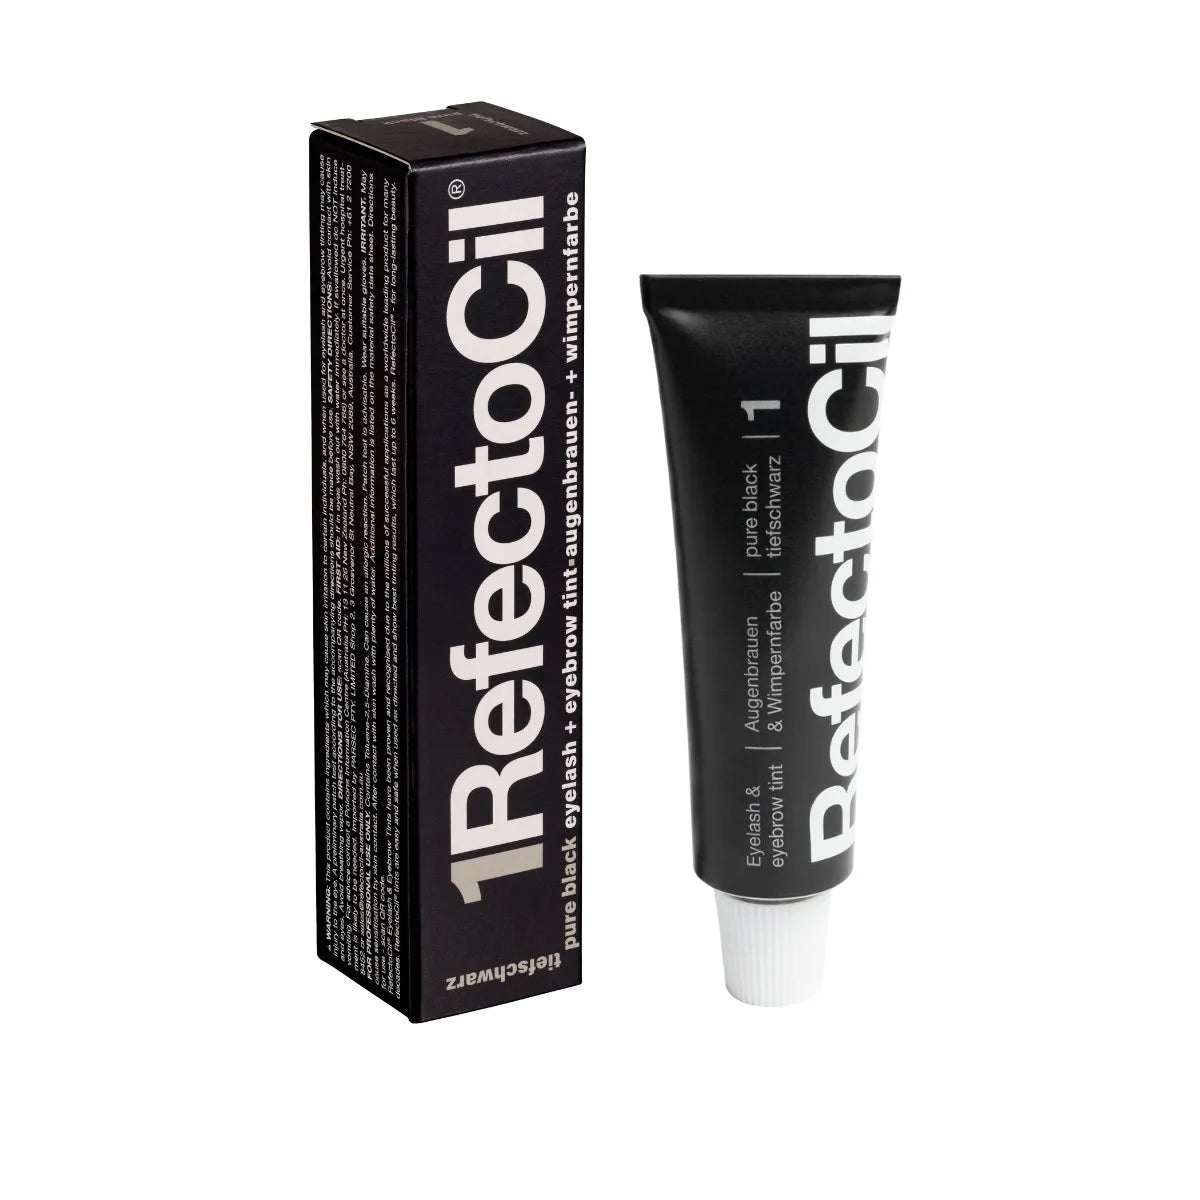 Refectocil Eyelash/Eyebrow Tinting PROFESSIONAL USE ONLY!  PLEASE READ DESCRIPTION BEFORE PURCHASE.